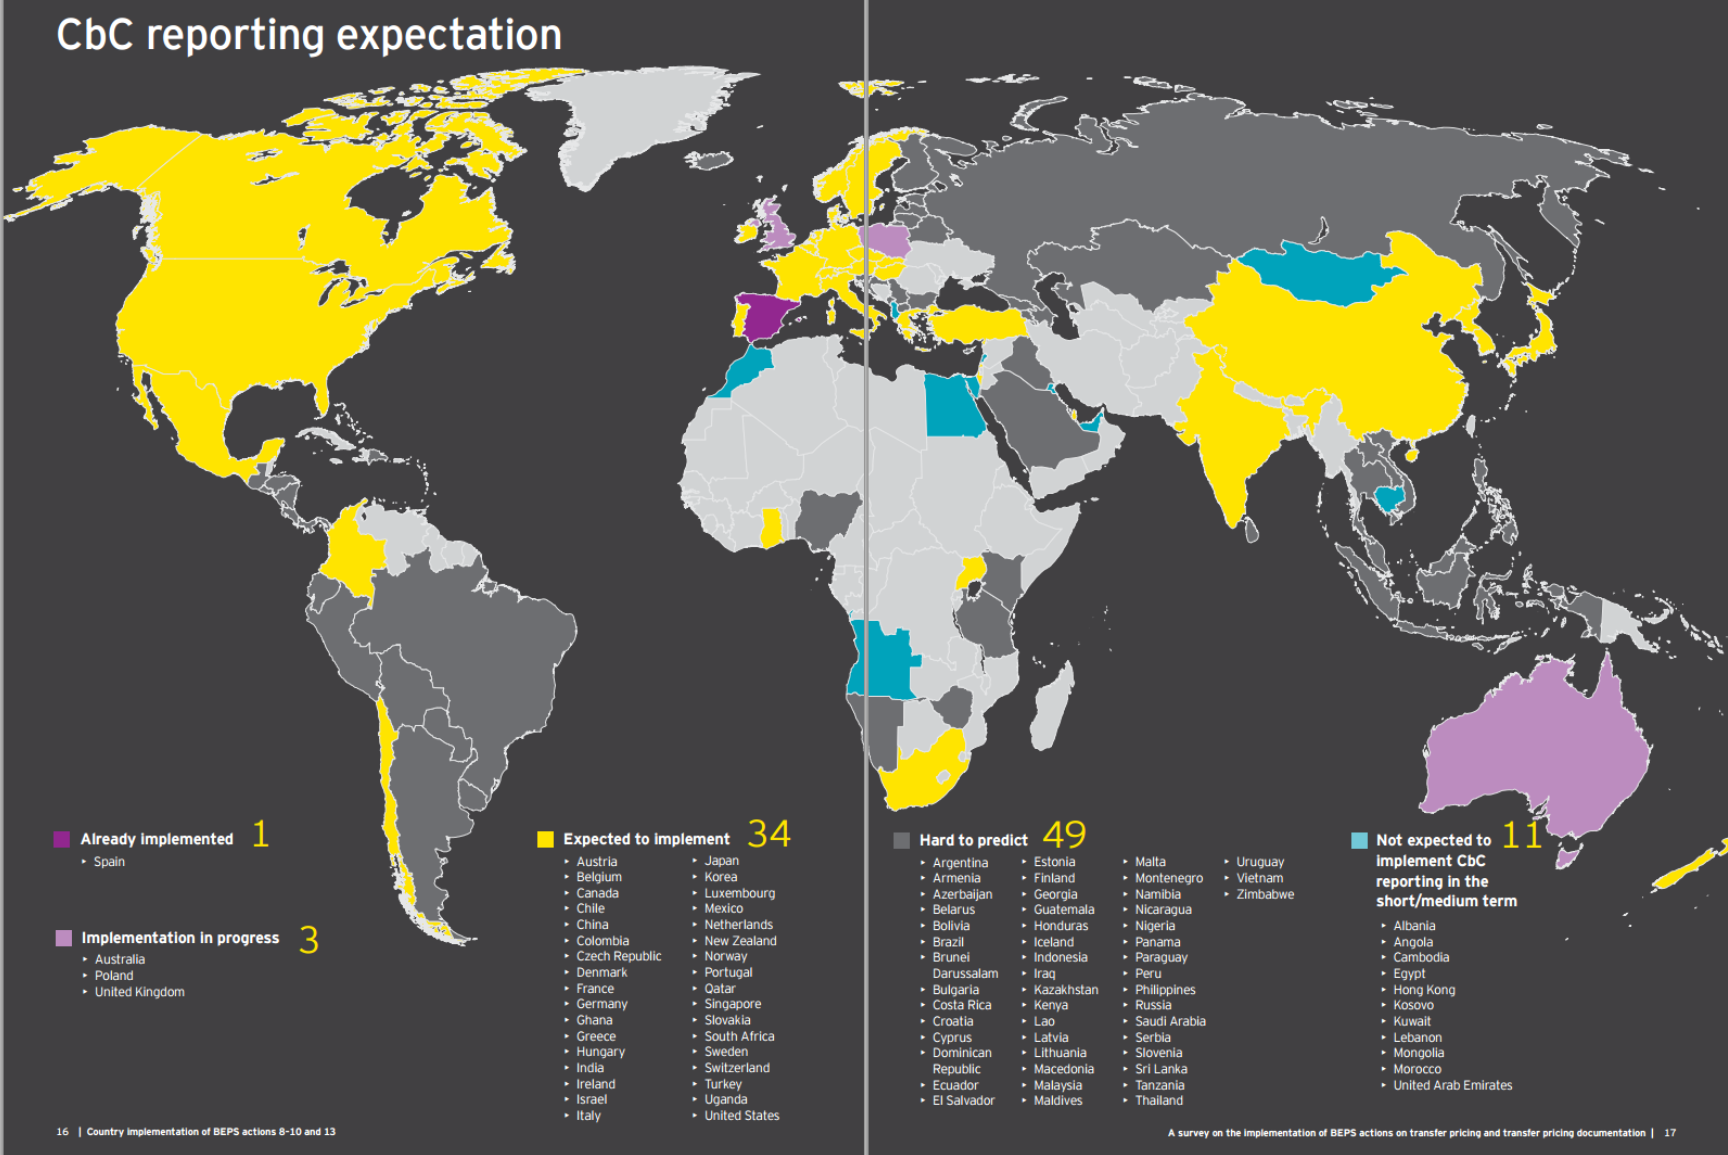 EY-CBC-expectation-map-Sep15